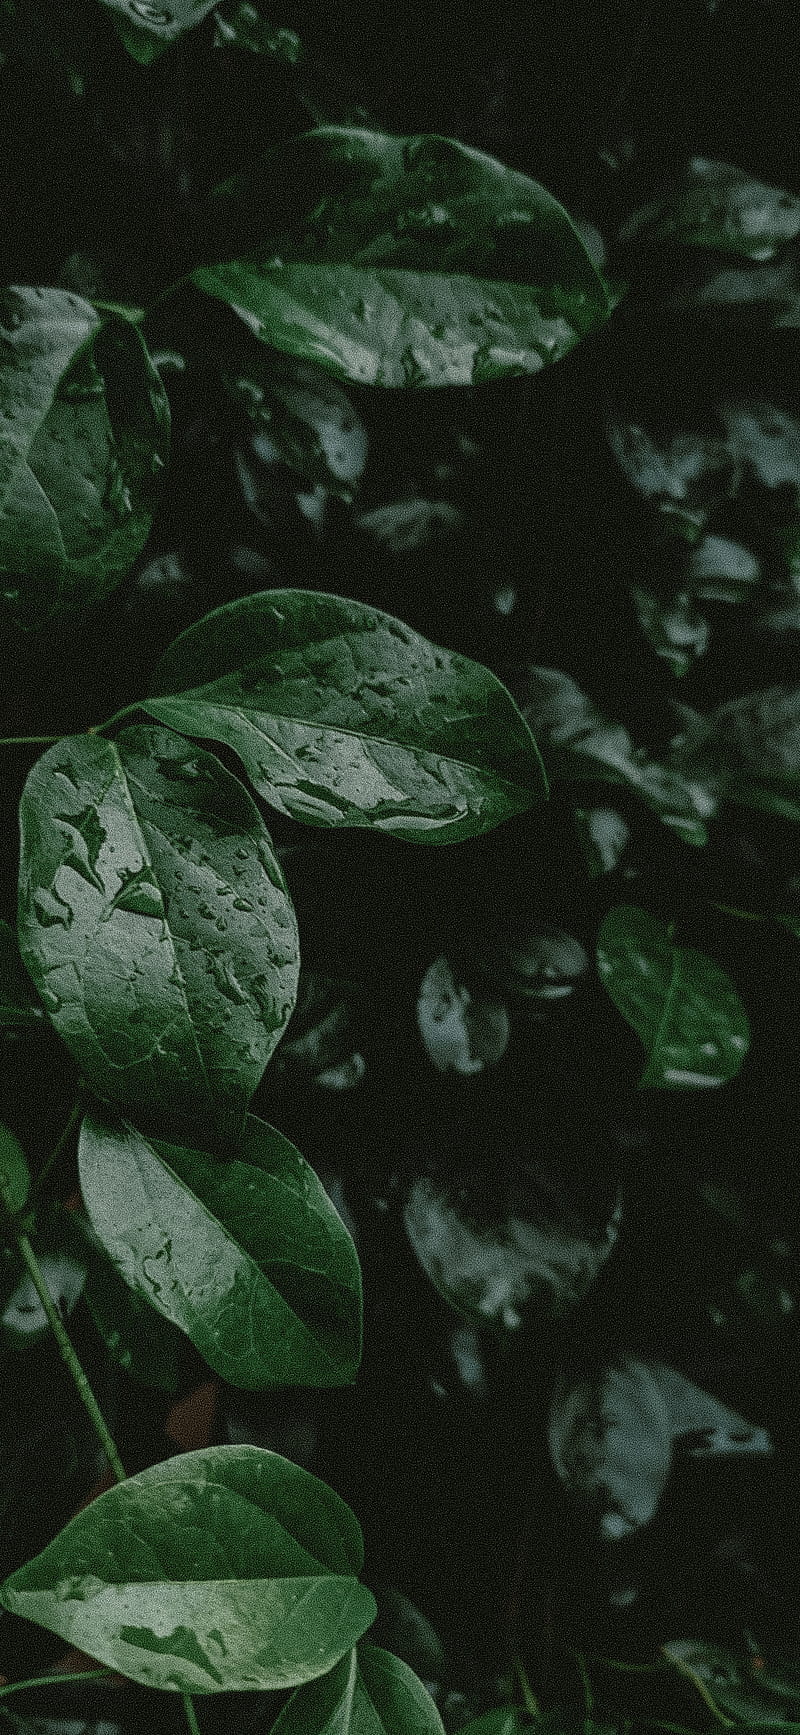 1920x1080px, 1080P free download | Moody day, aesthetic, green, nature ...